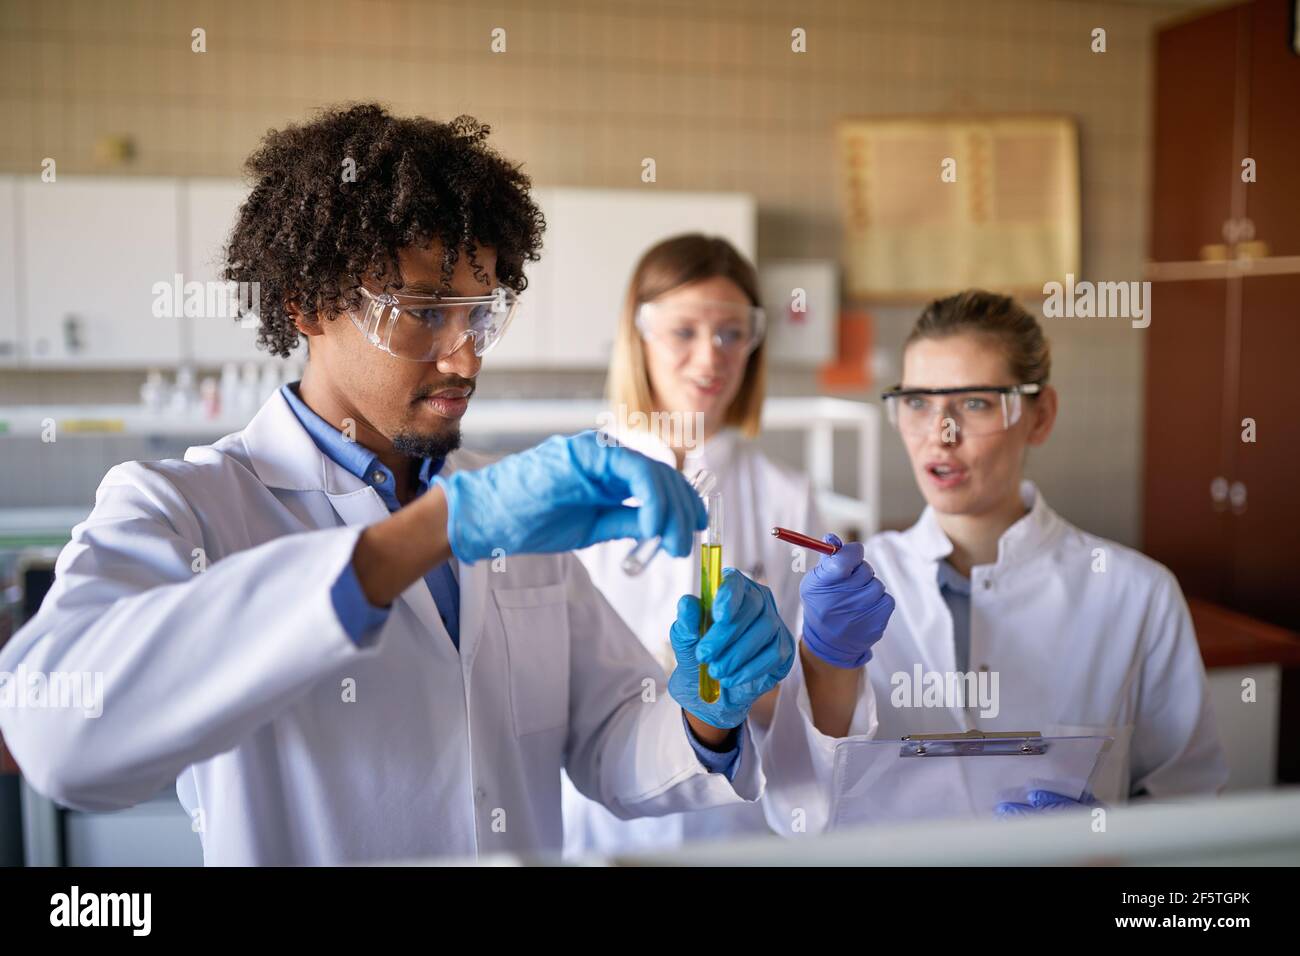 Young chemistry students in a protective gear mix some chemicals in the university laboratory in a working atmosphere. Science, chemistry, lab, people Stock Photo